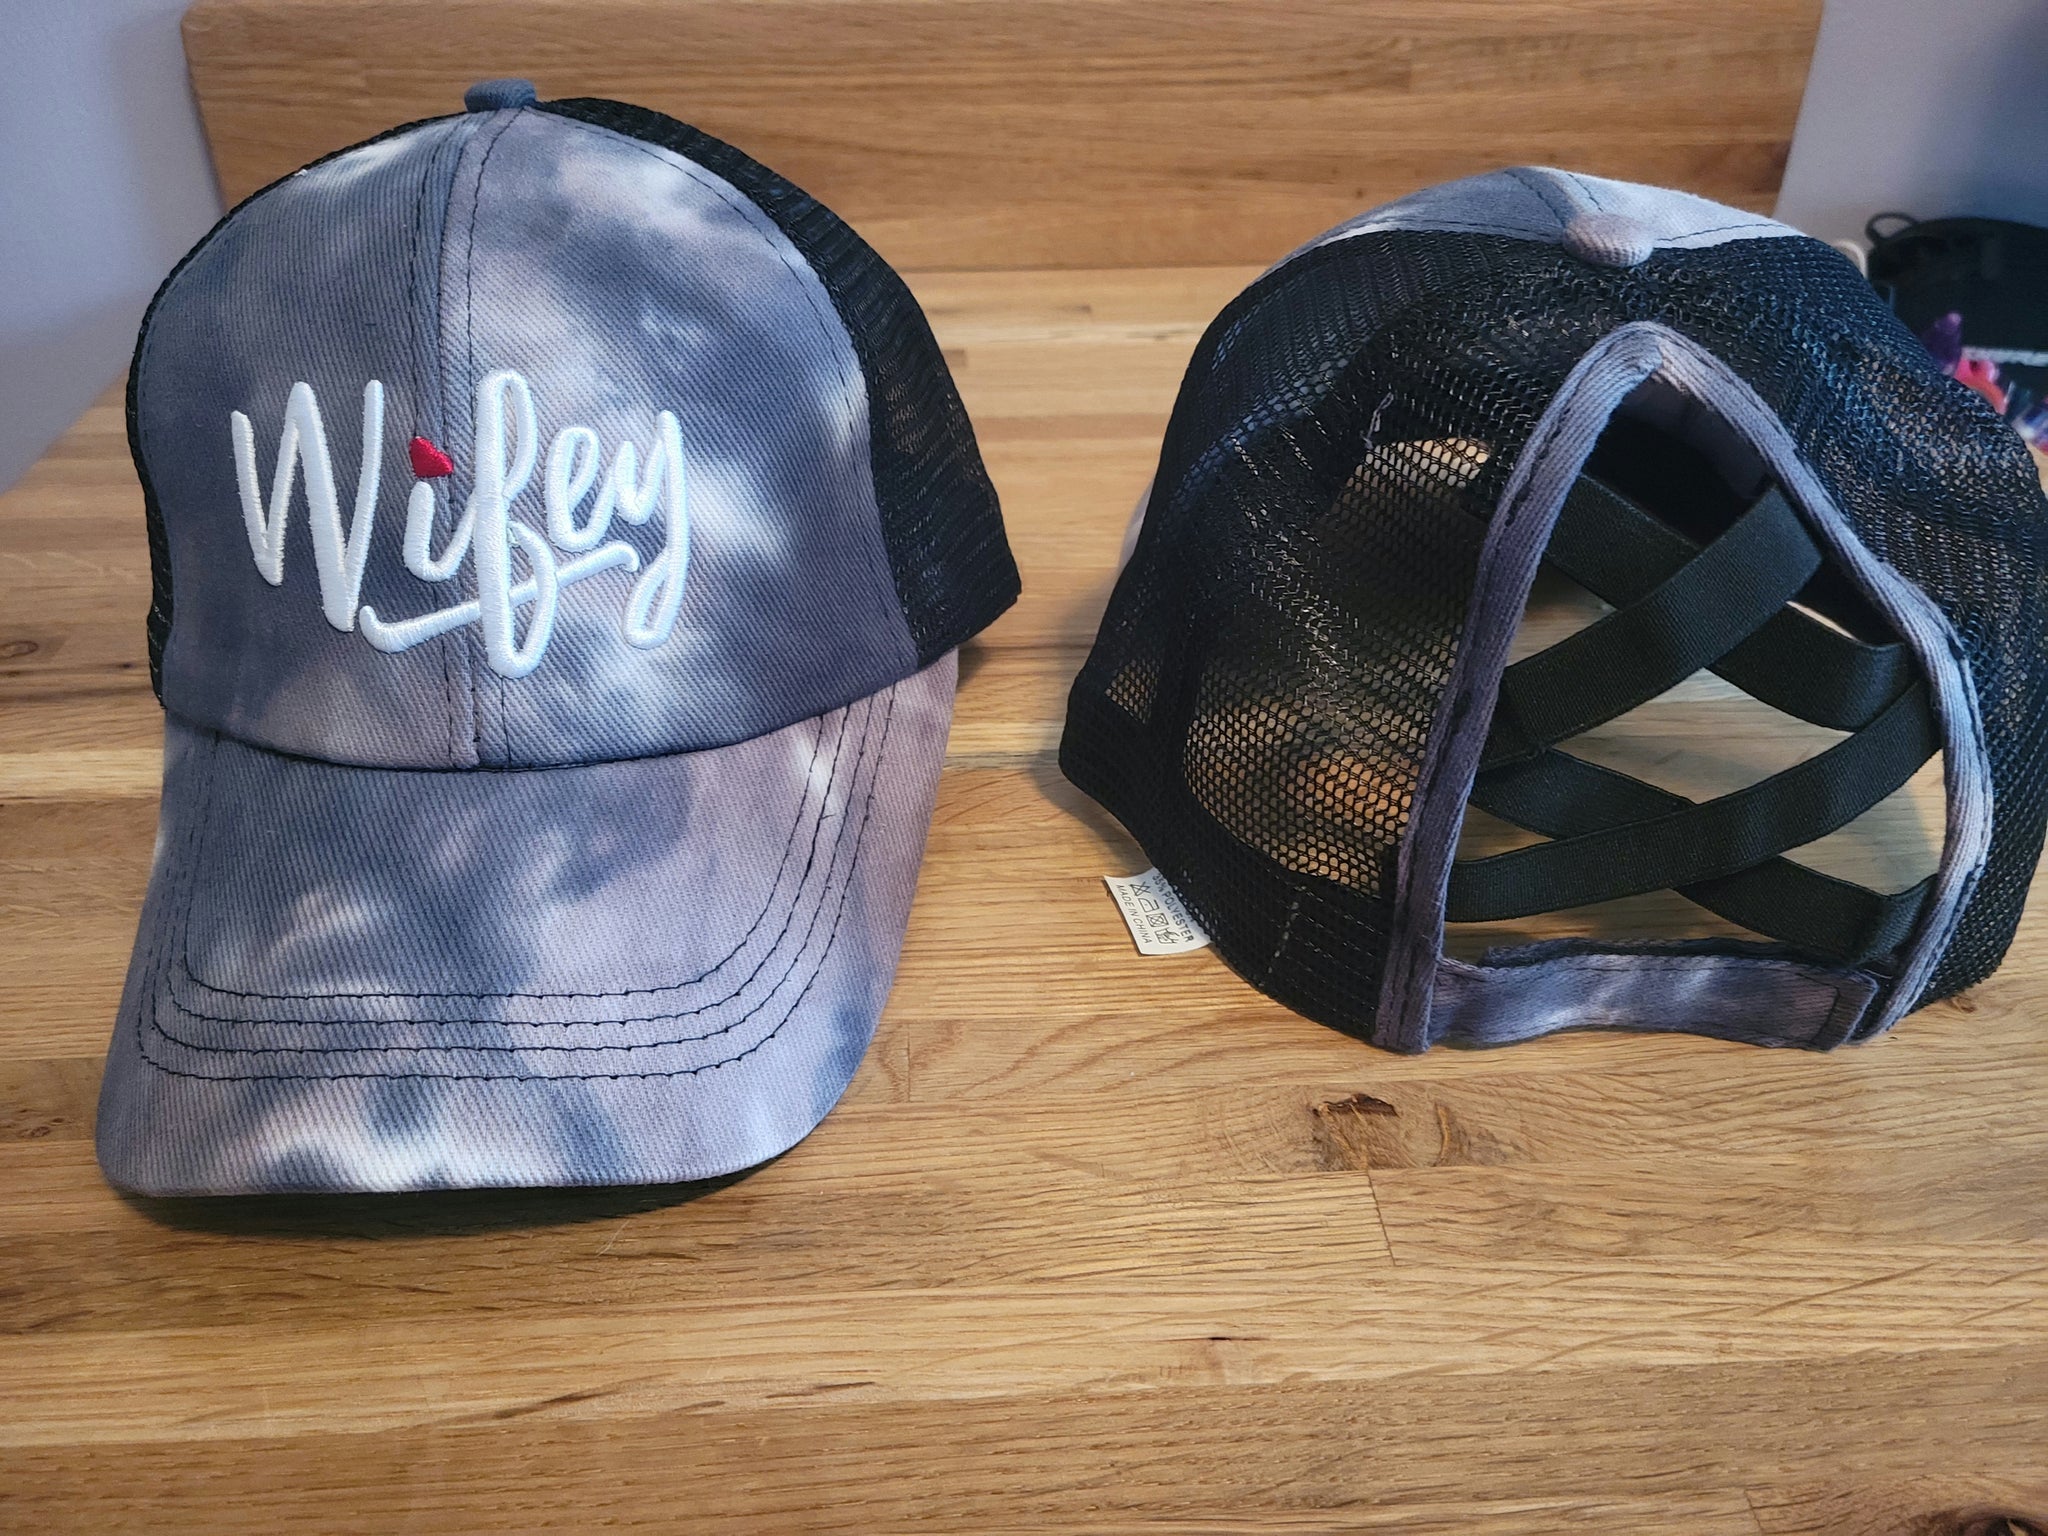 Tie Dyed Trucker Wifey Criss Cross Ponytail Hat - Gals and Dogs Boutique Limited